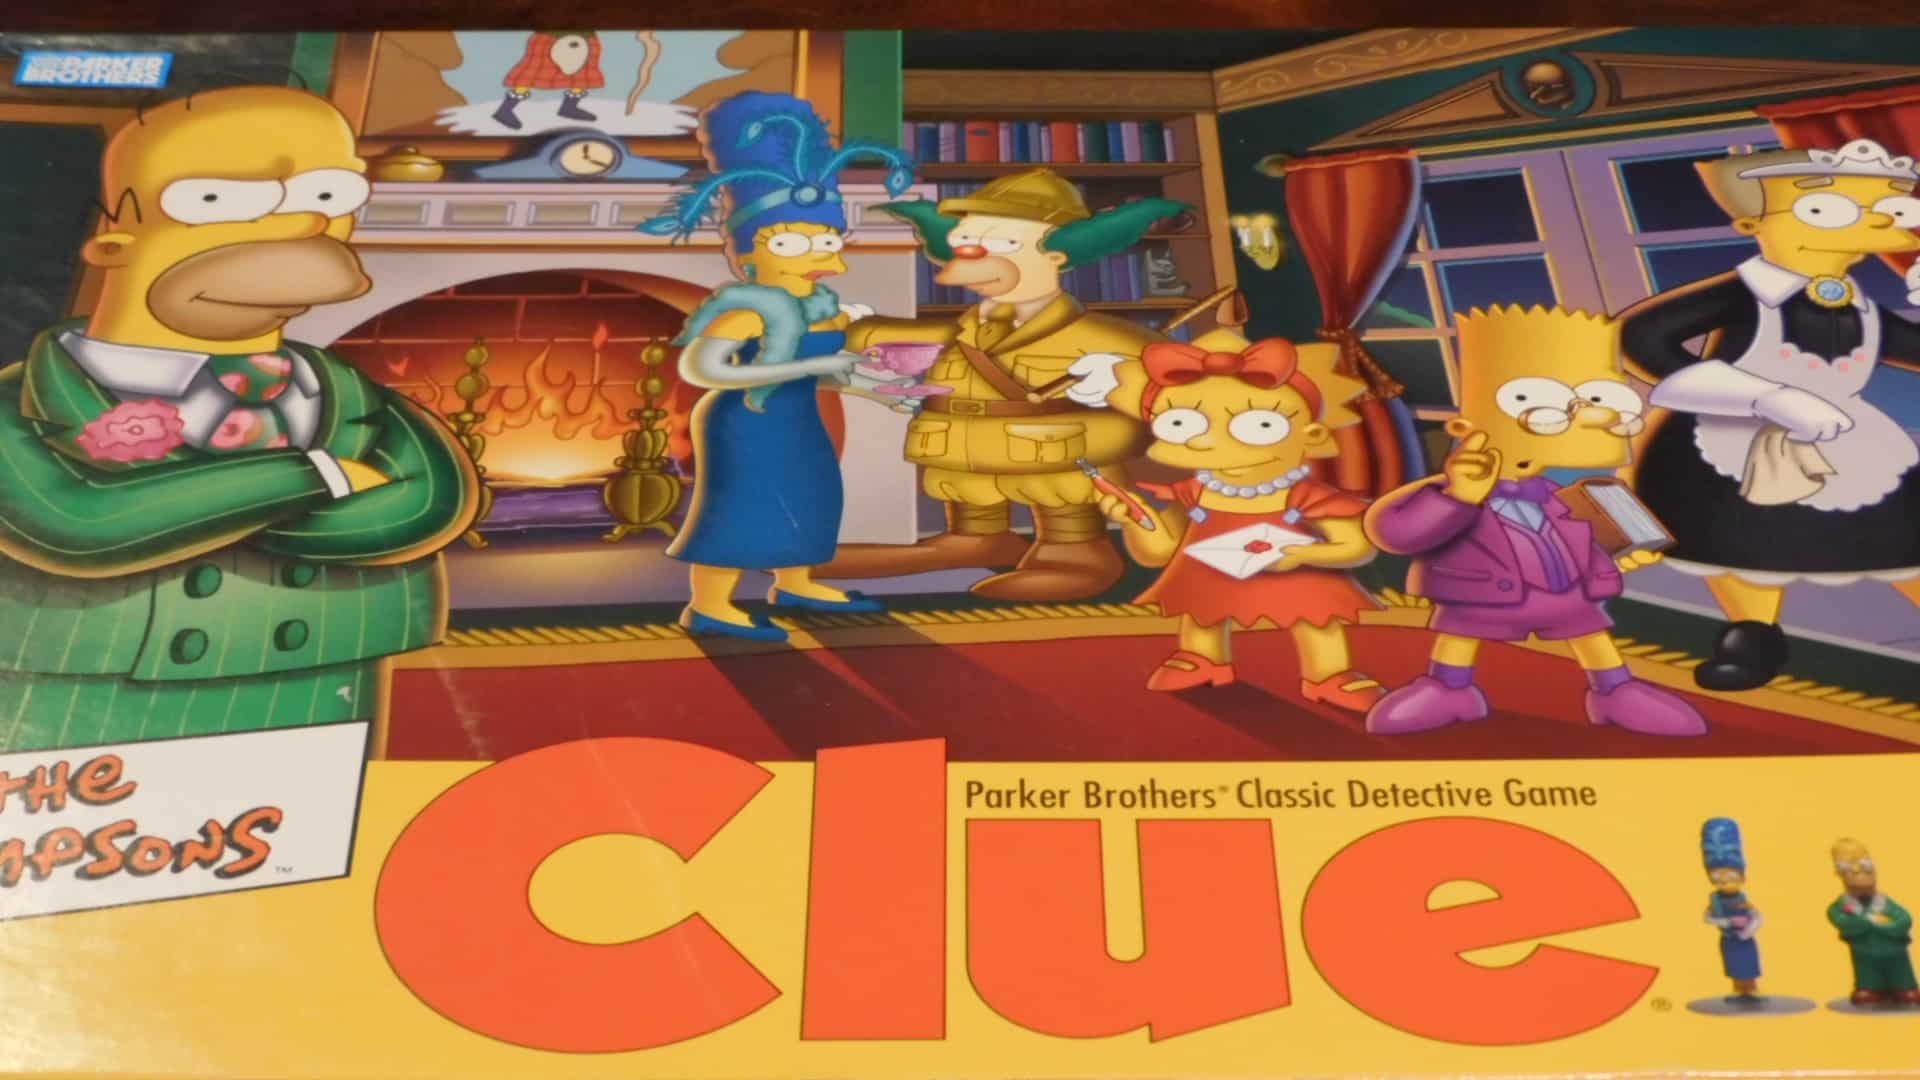 A closeup of the box art for the Simpsons Clue 2nd Edition.